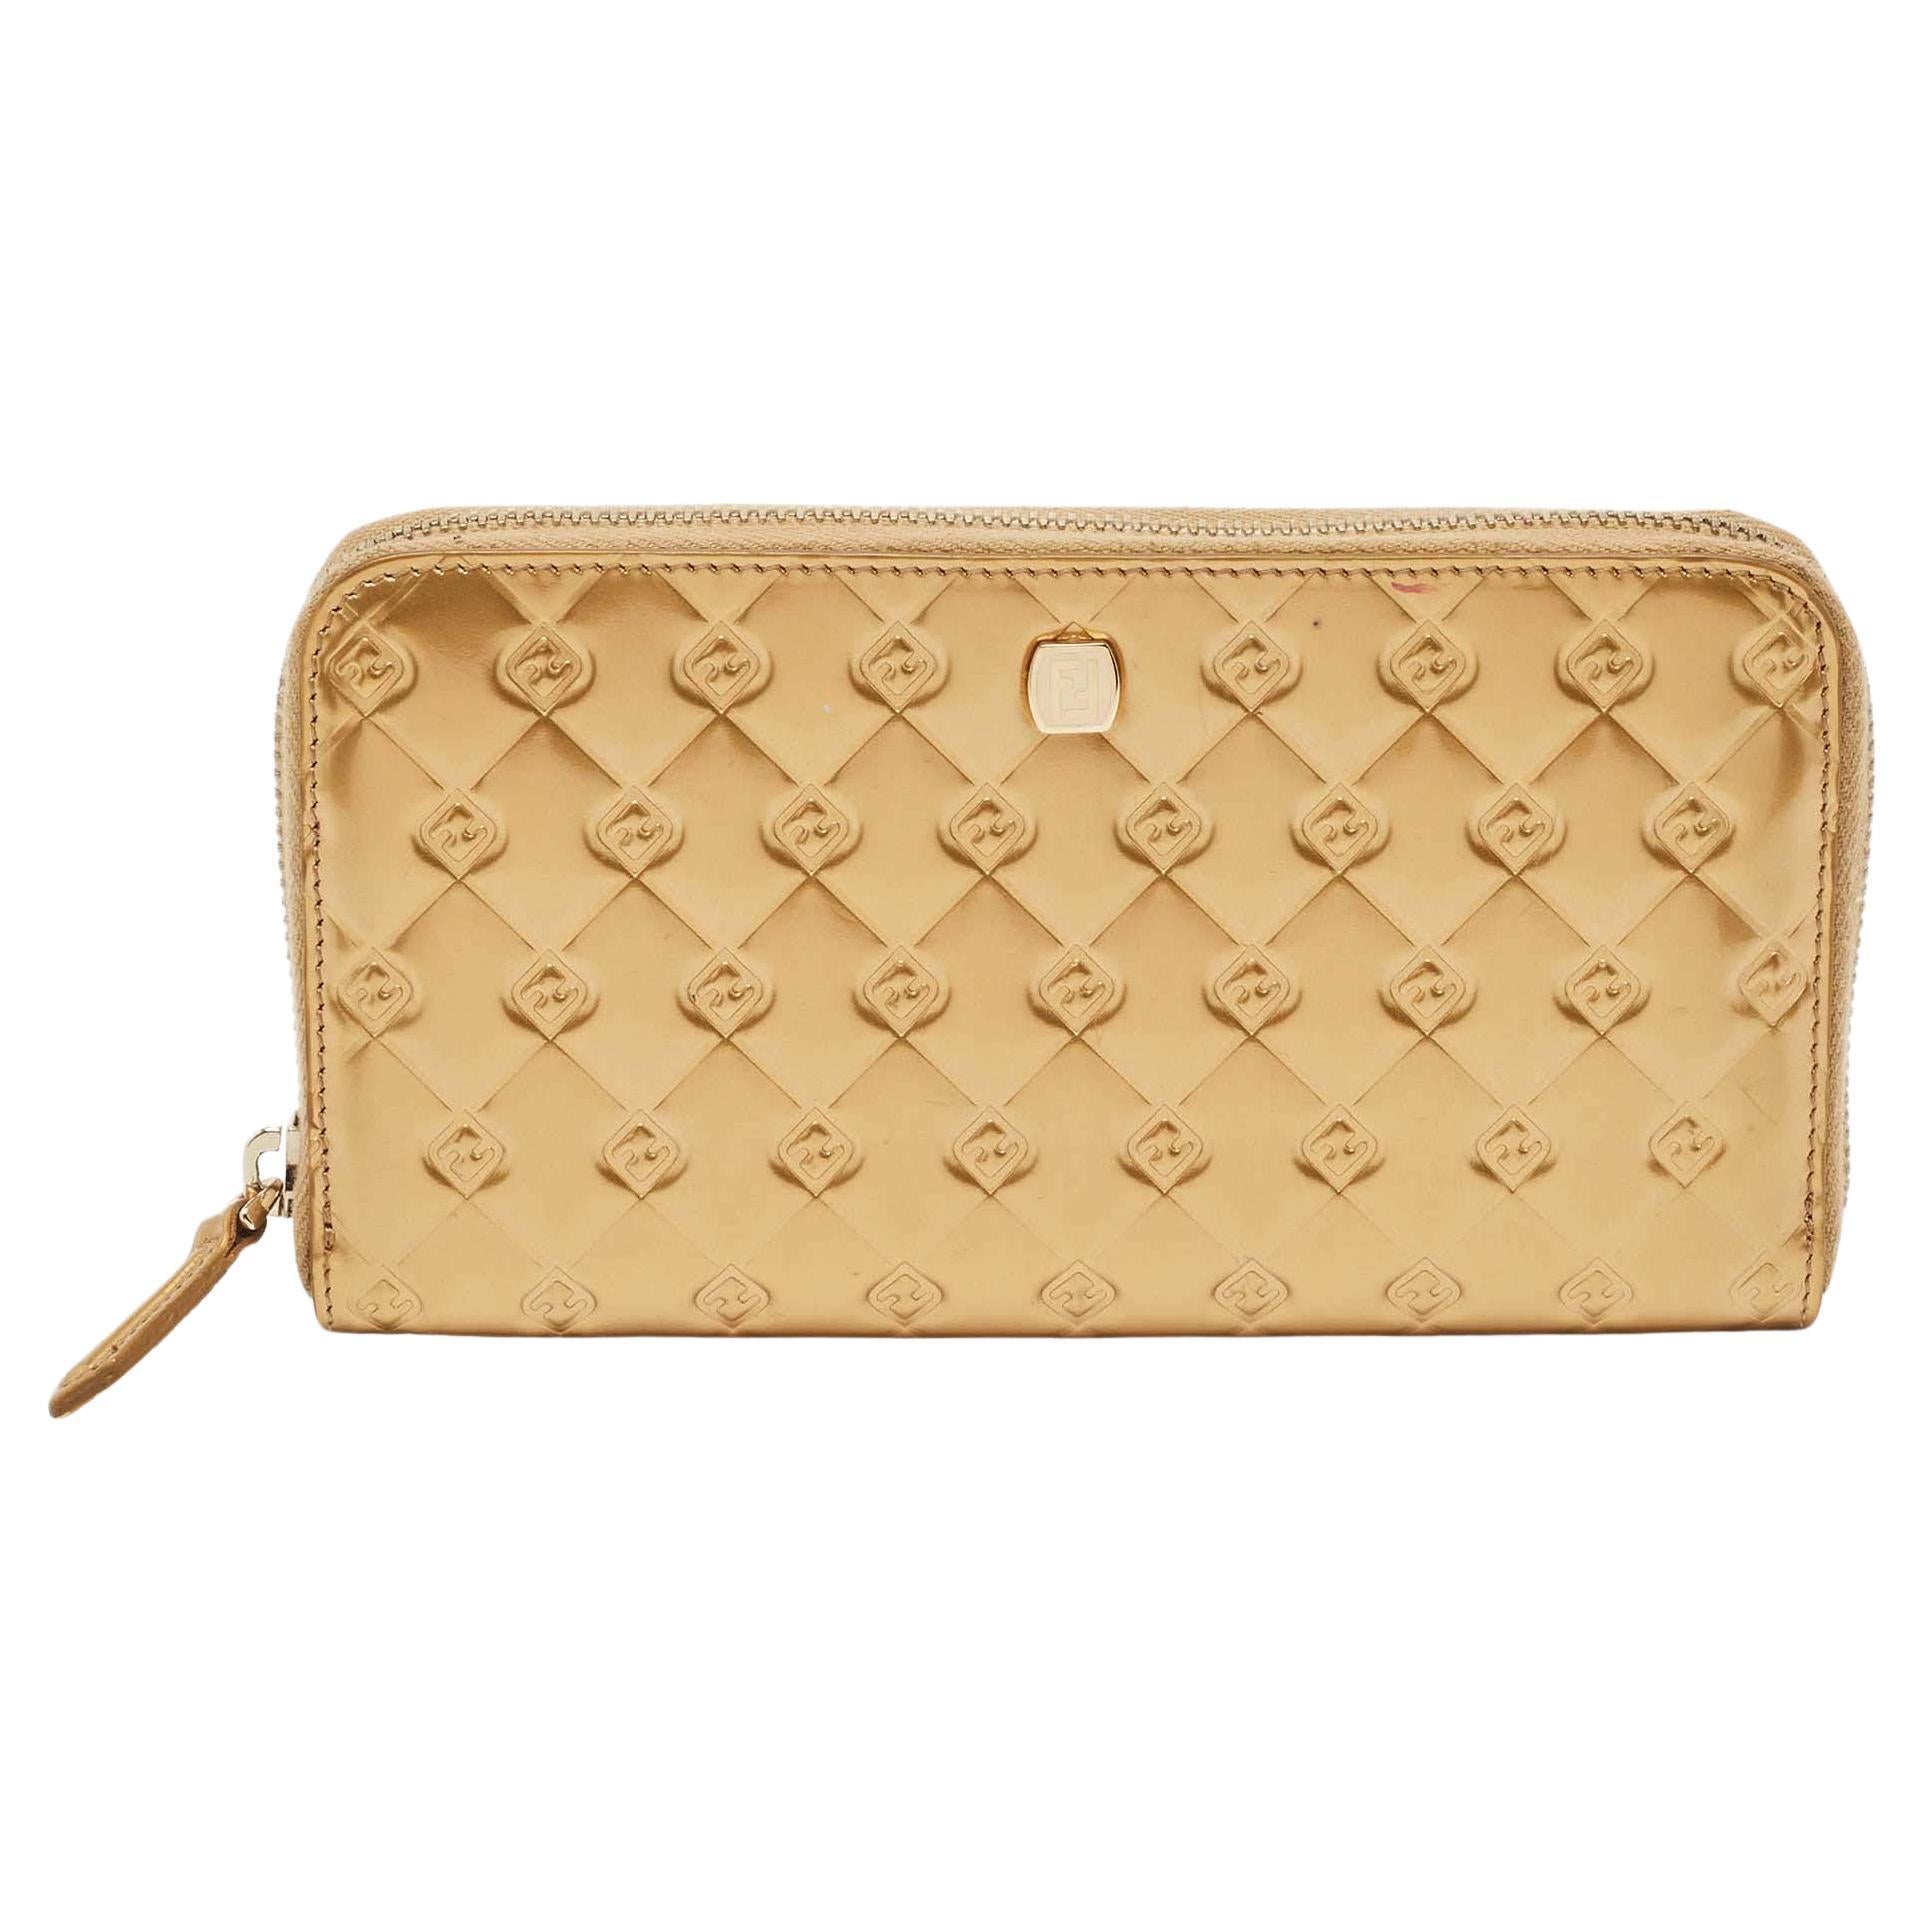 Fendi Gold Embossed Patent Leather Fendilicious Continental Wallet For Sale